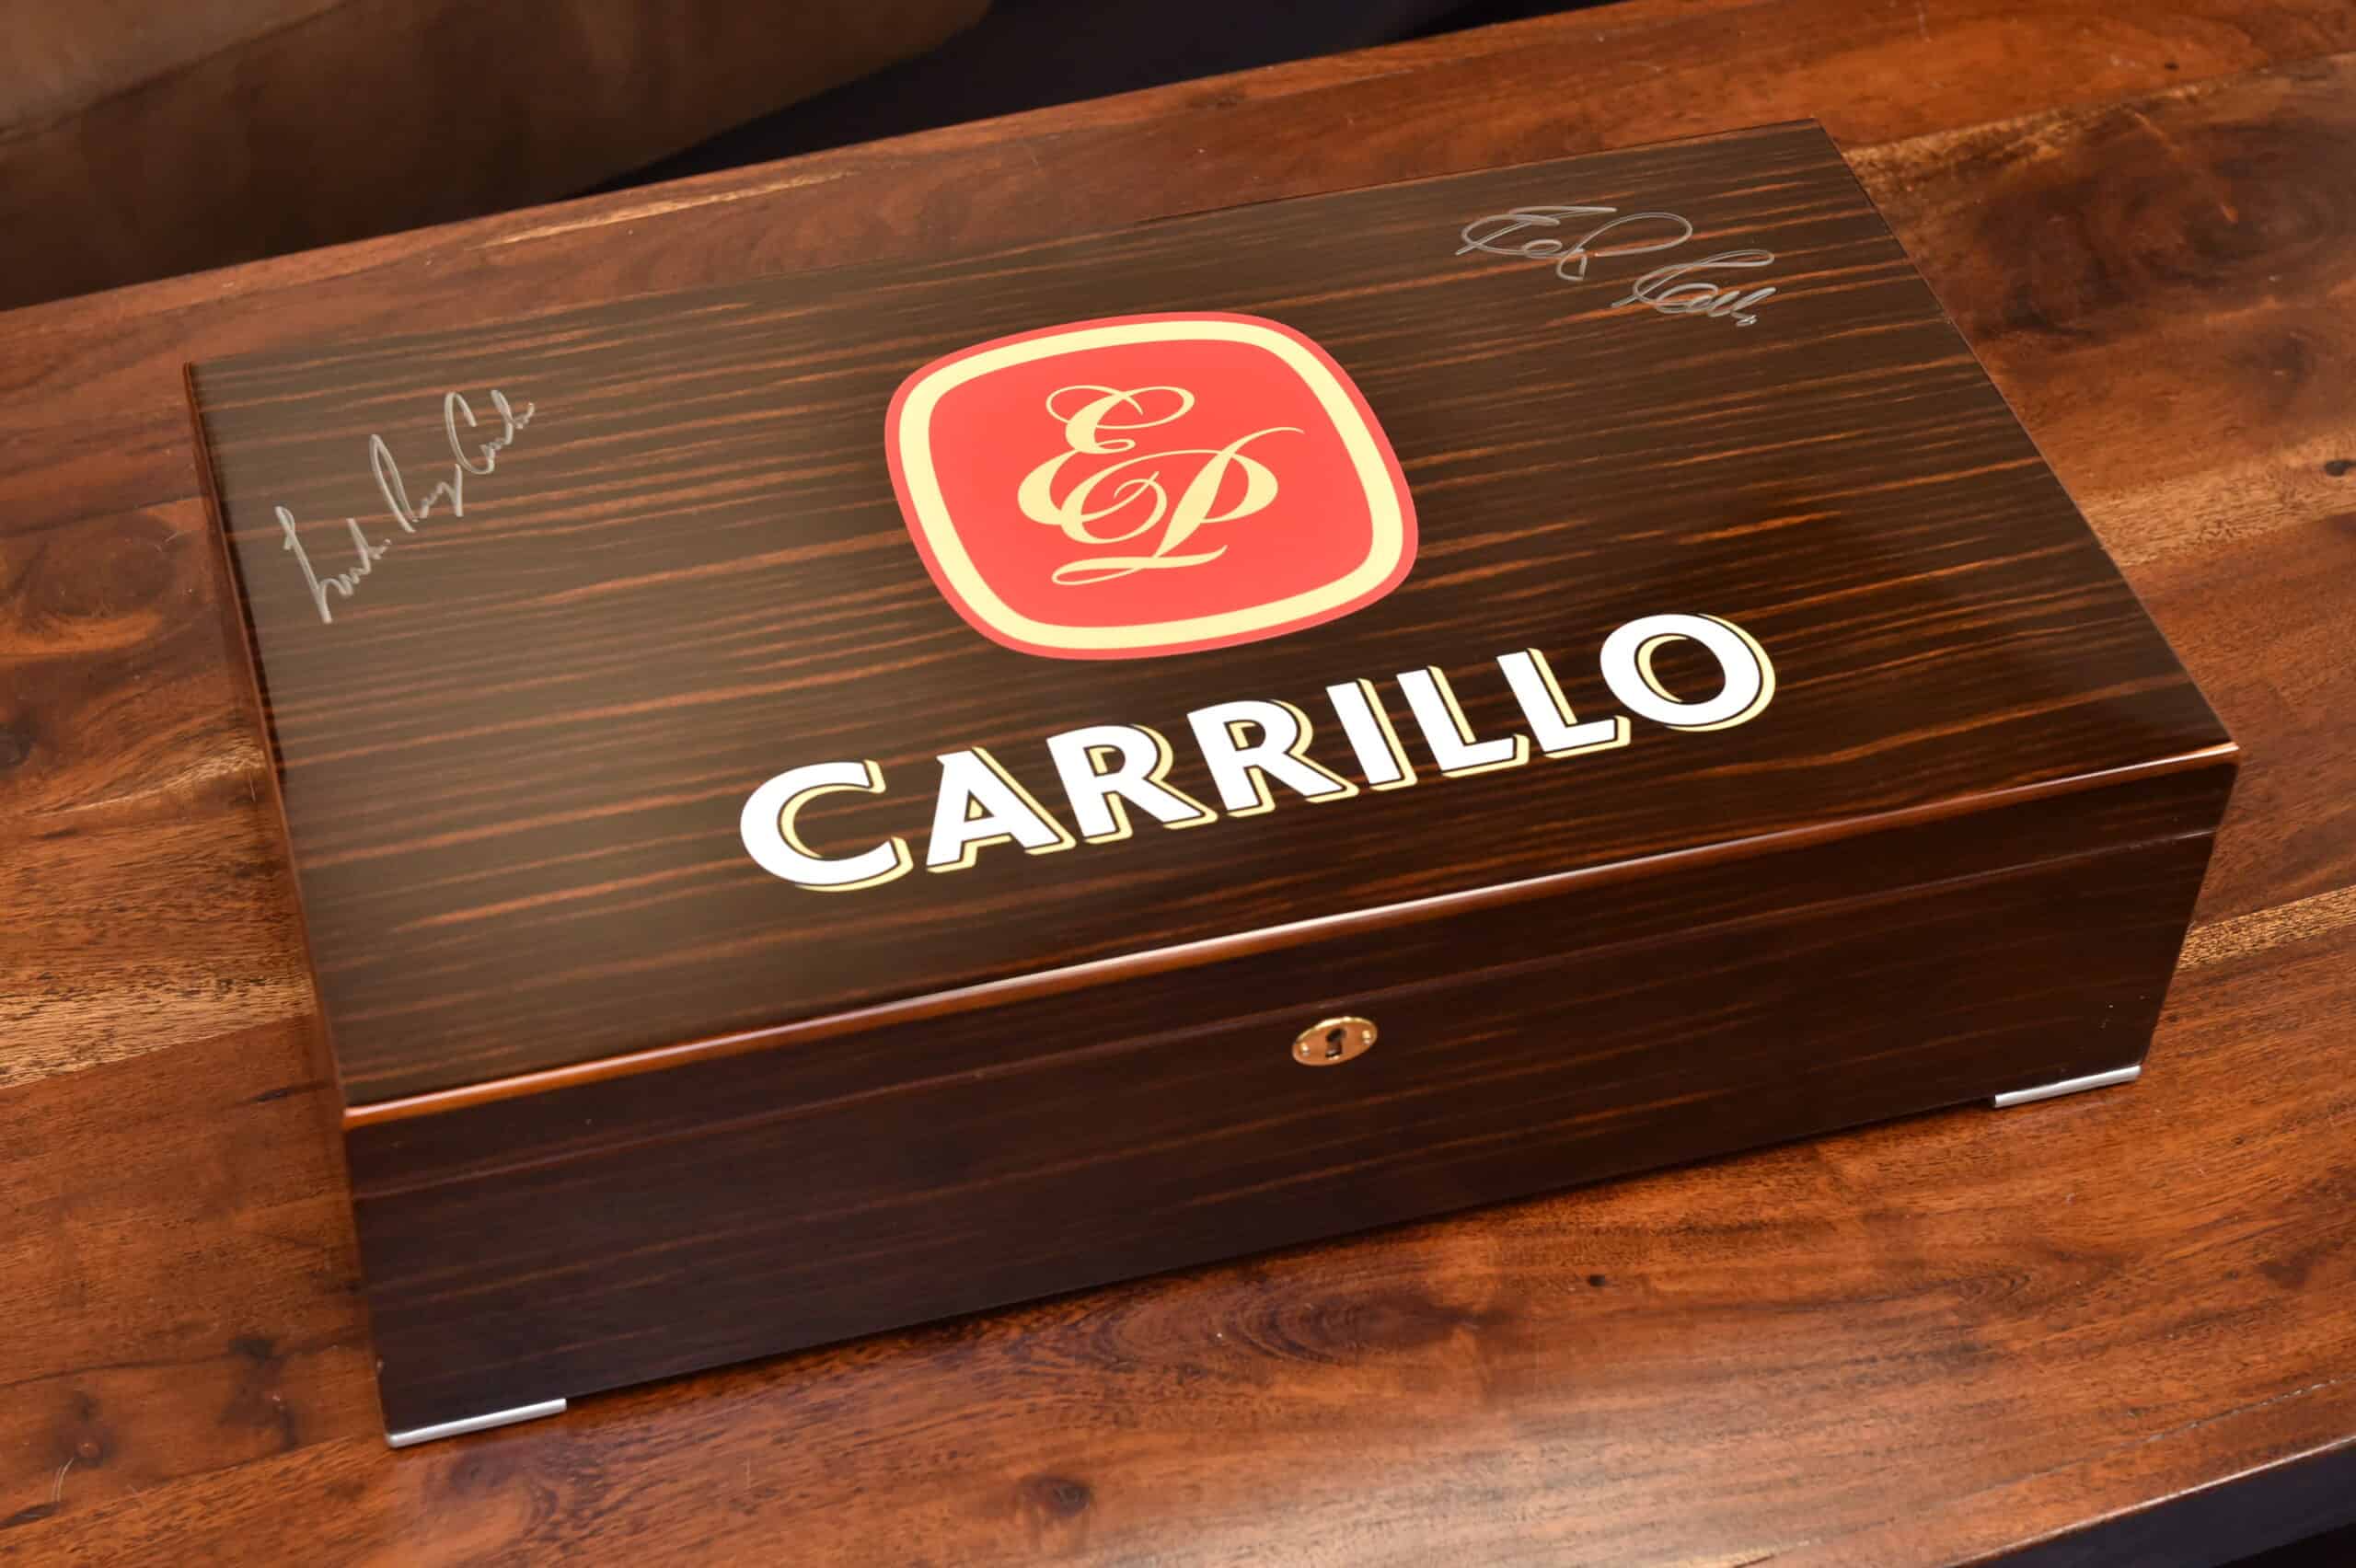 How to Use Humidors and Store Cigars